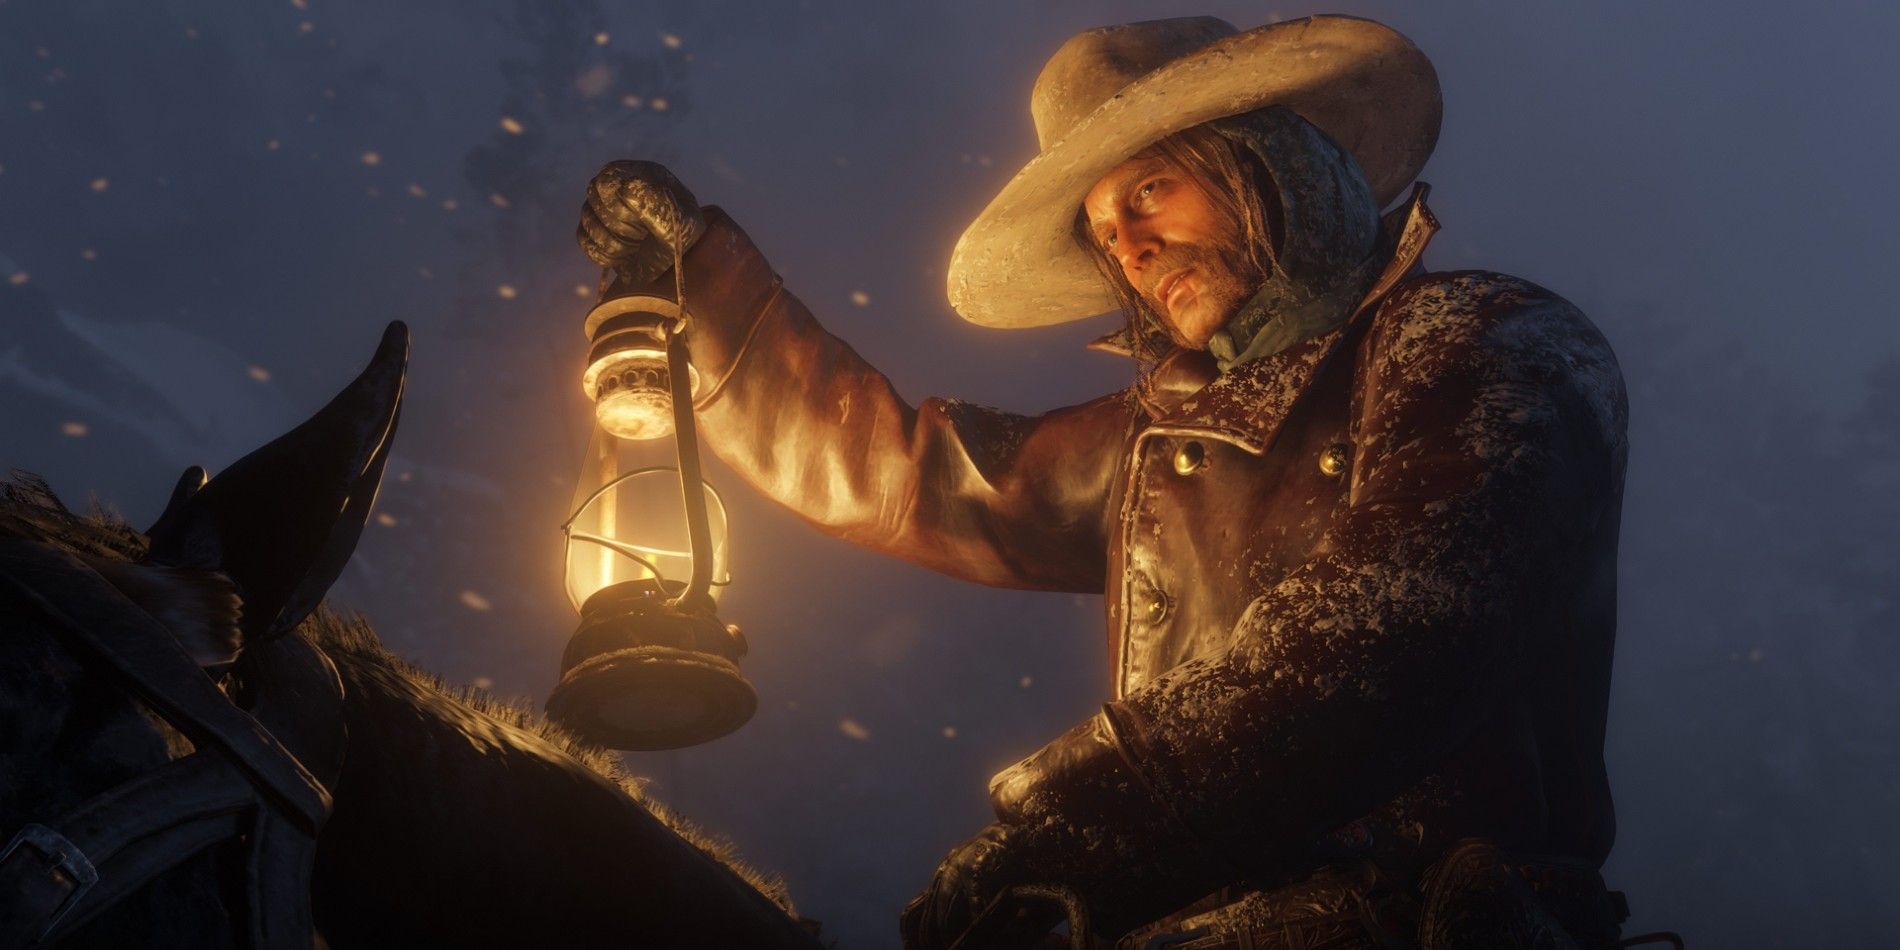 Red Dead Redemption 2: Micah’s Villainy Was Obvious From The Start